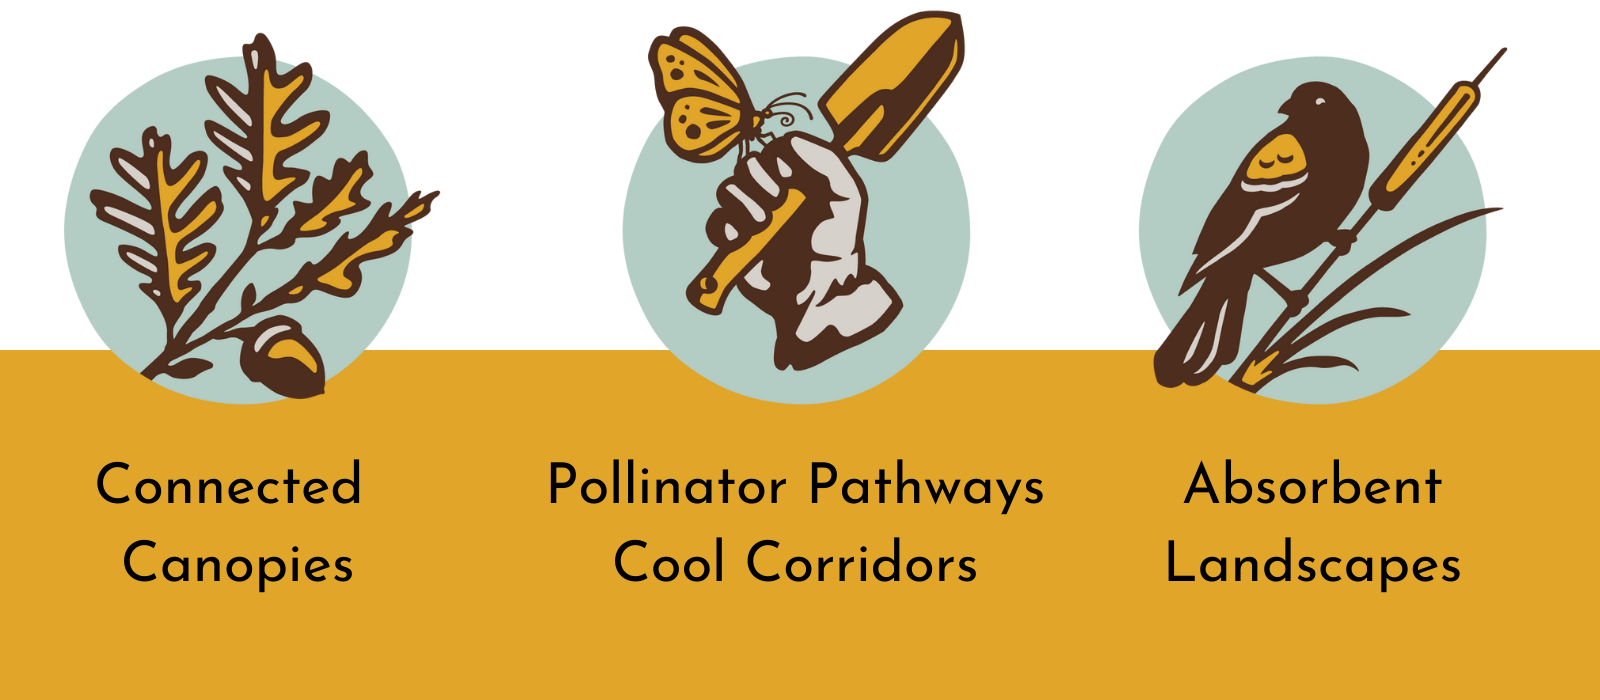 Connected Canopies, Pollinator Pathways/Cool Corridors, Absorbent Landscapes